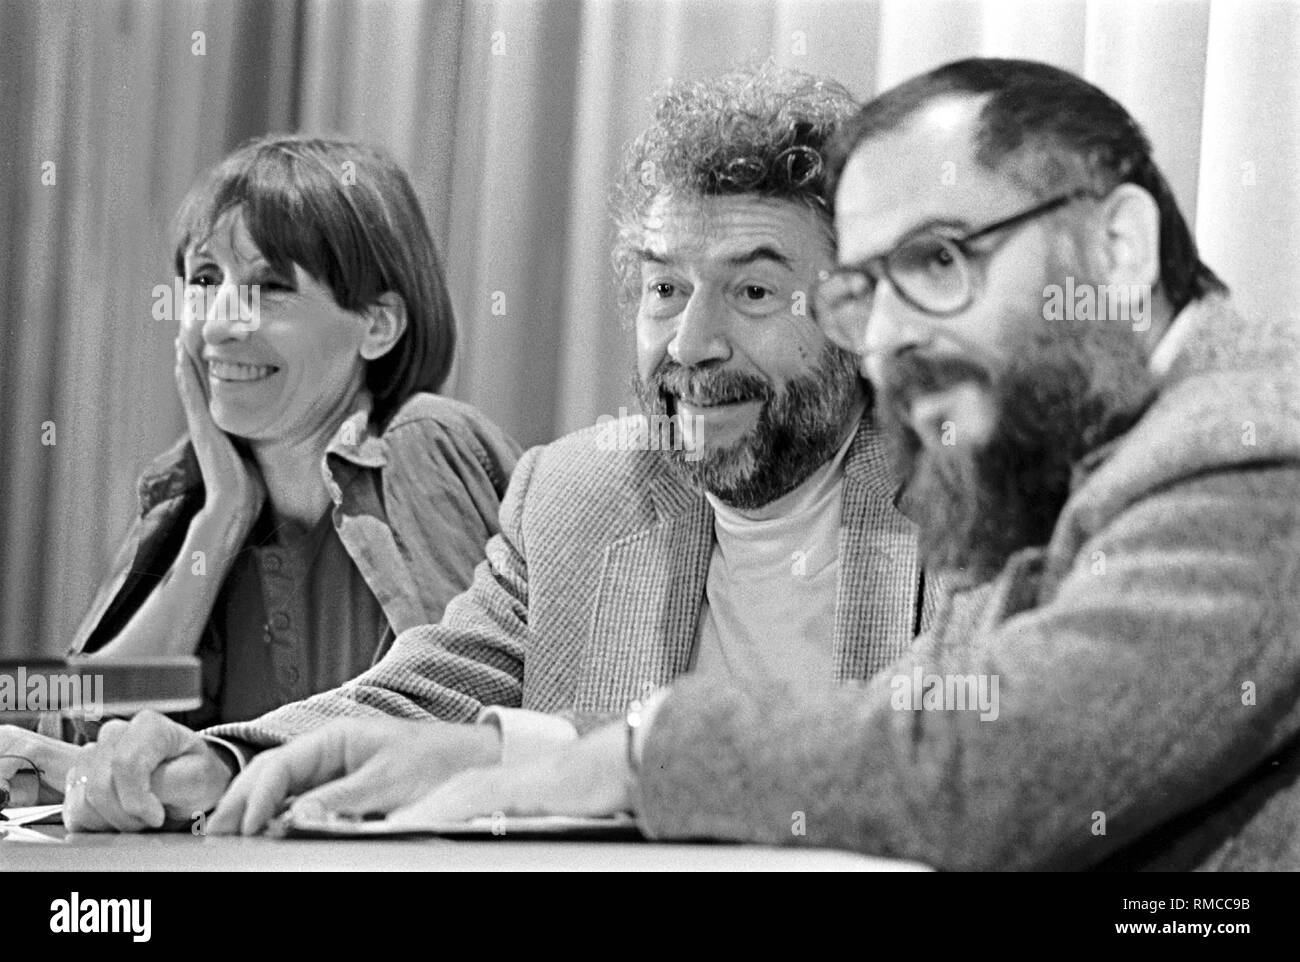 Germany, Berlin, 26.06.1987, (from left to right) Brigitte Burmeister (literary scholar and writer), Robbe - Grillet (French agricultural engineer, filmmaker, writer),?, in the CCF (Center Culturel Franzaise). Stock Photo